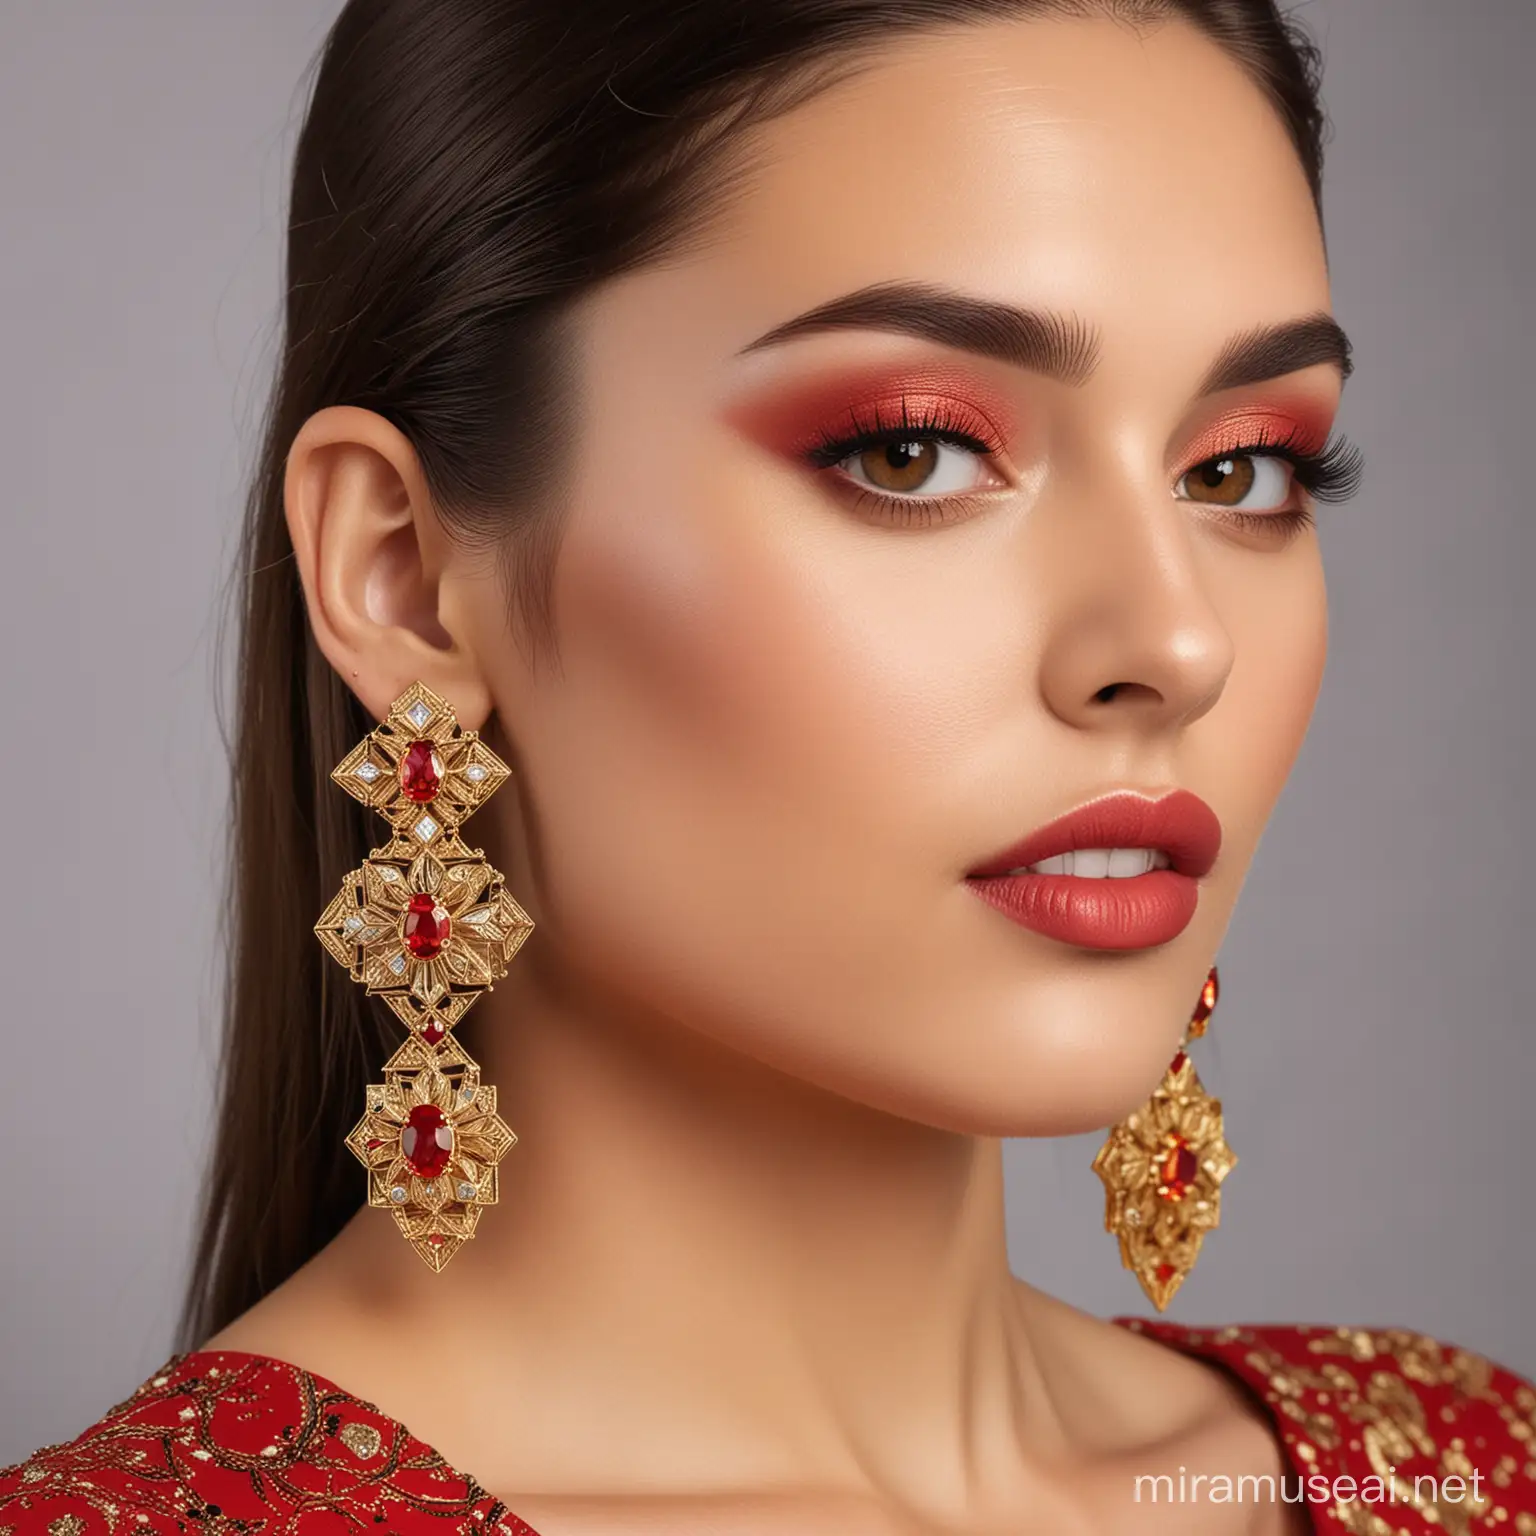 Elegant Gold Earrings with Floral and Geometric Designs Worn with Red Dress and Striking Makeup